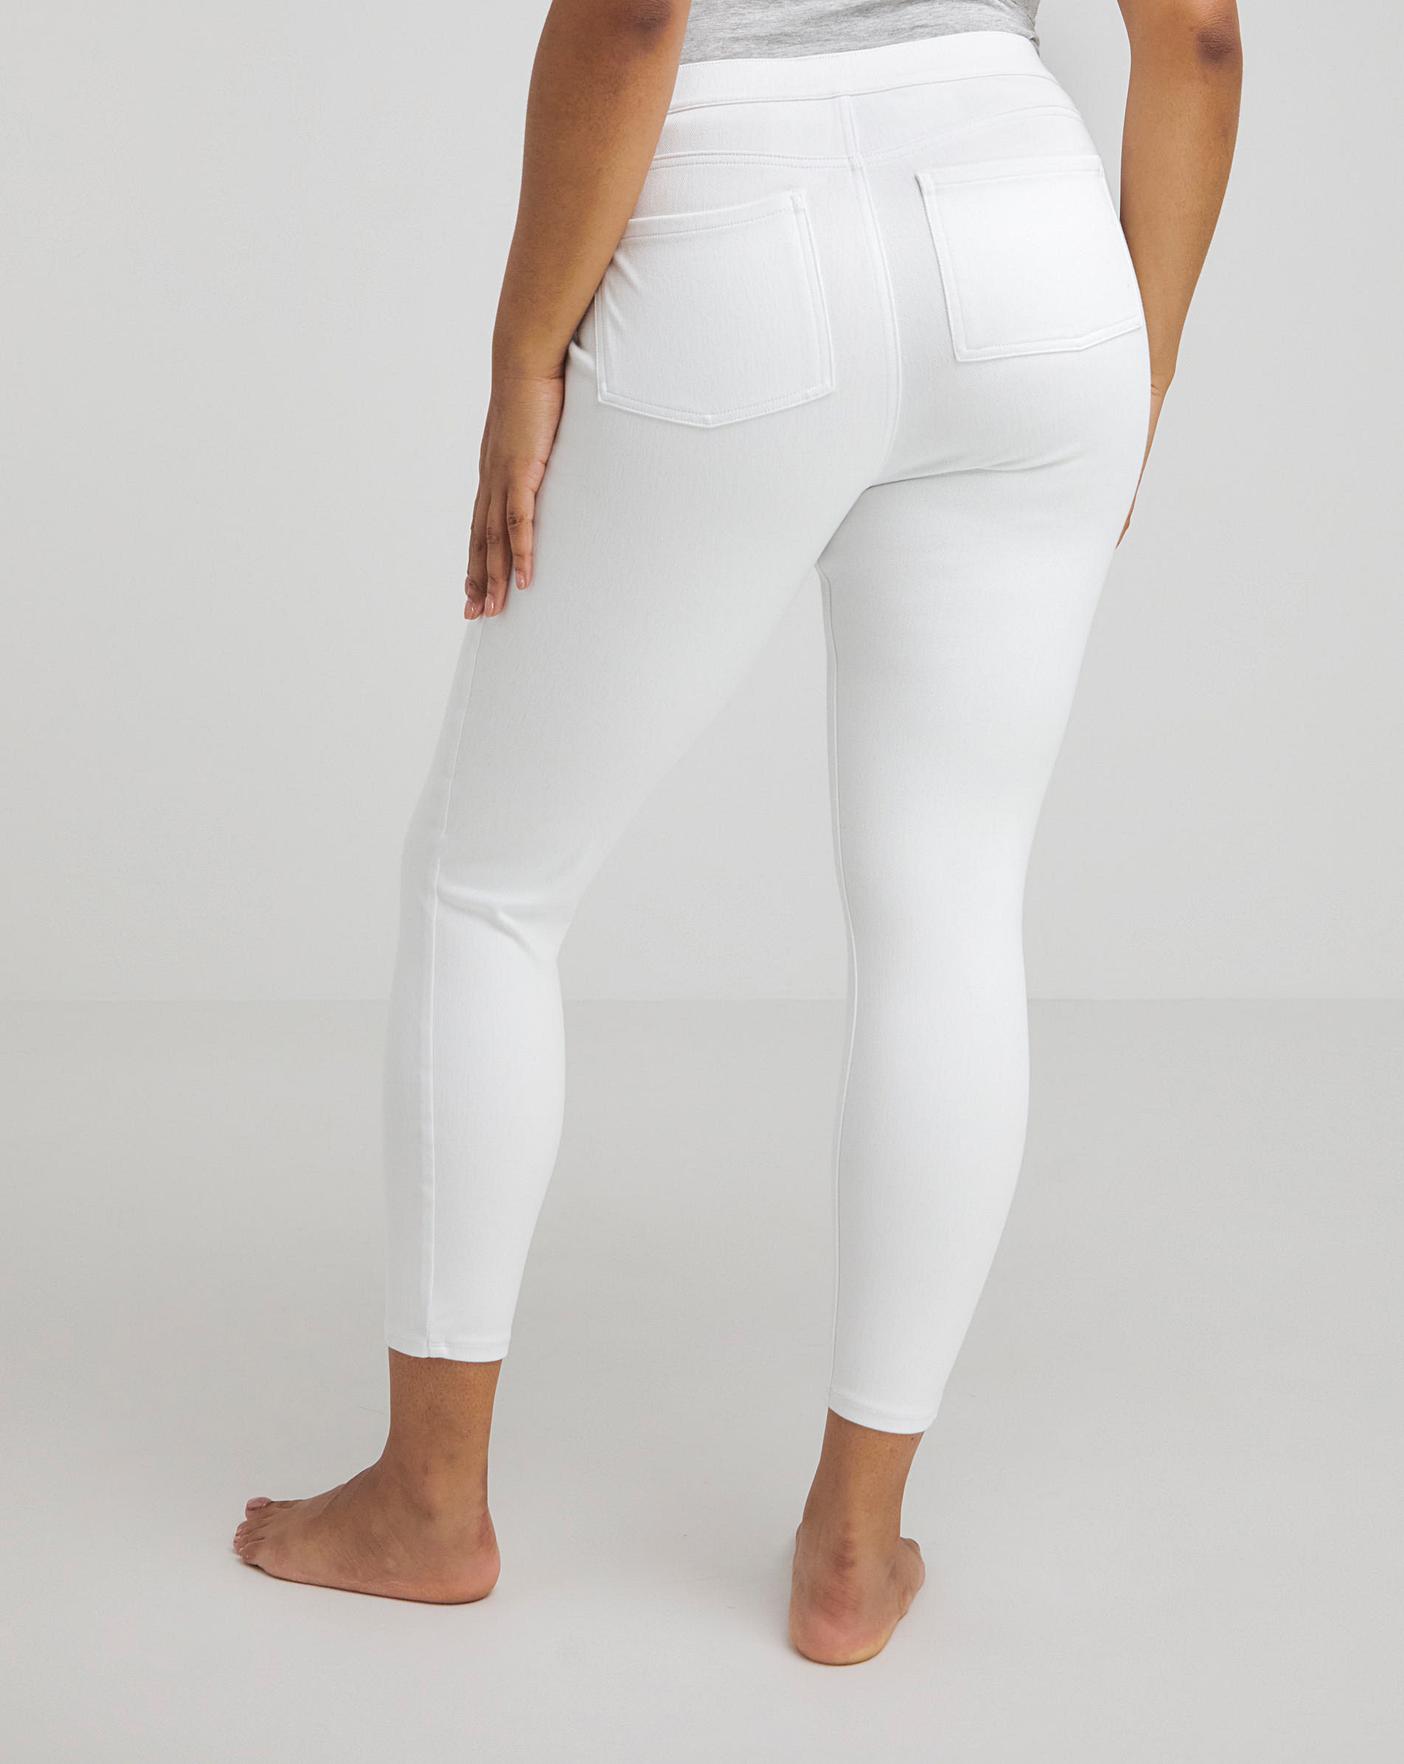 SPANX, Pants & Jumpsuits, Spanx Jeanishankle Leggings White Jeans Jegging